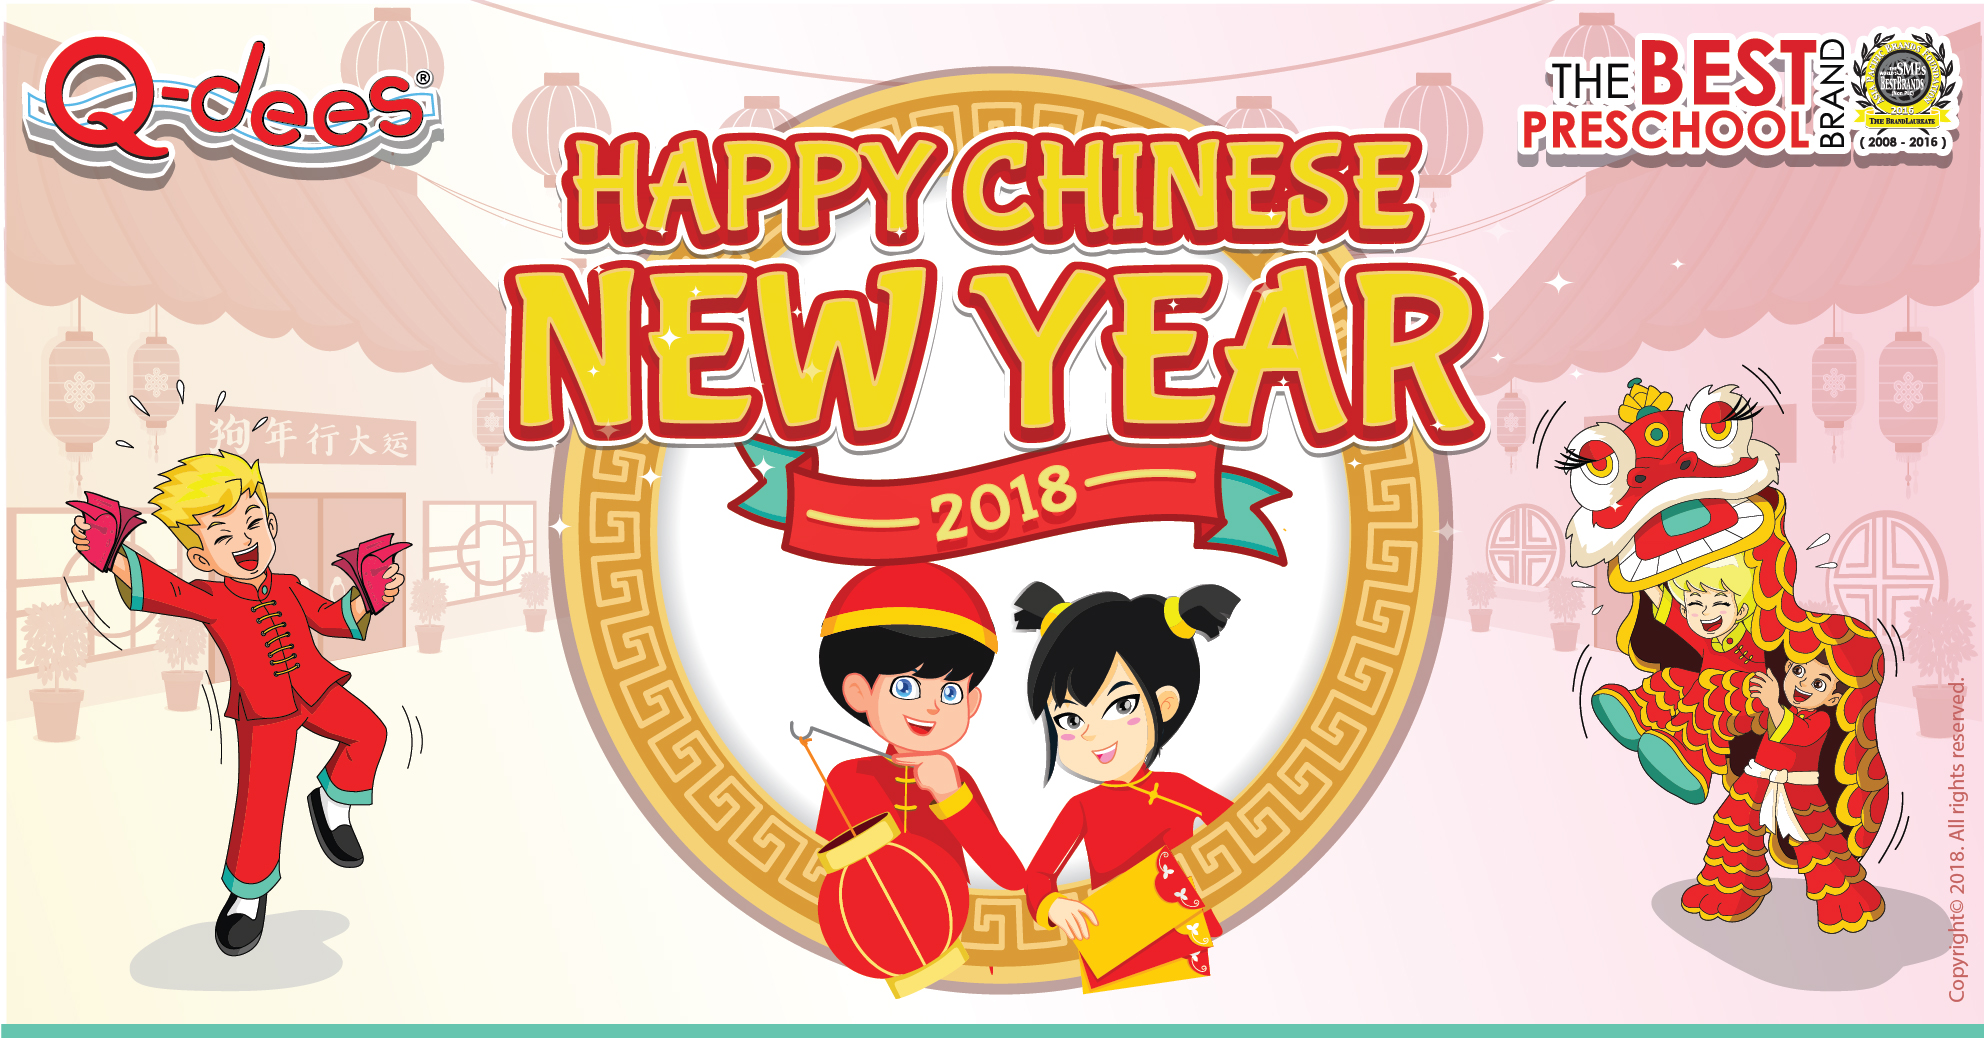 What Is Your Favourite Chinese New Year Activity?